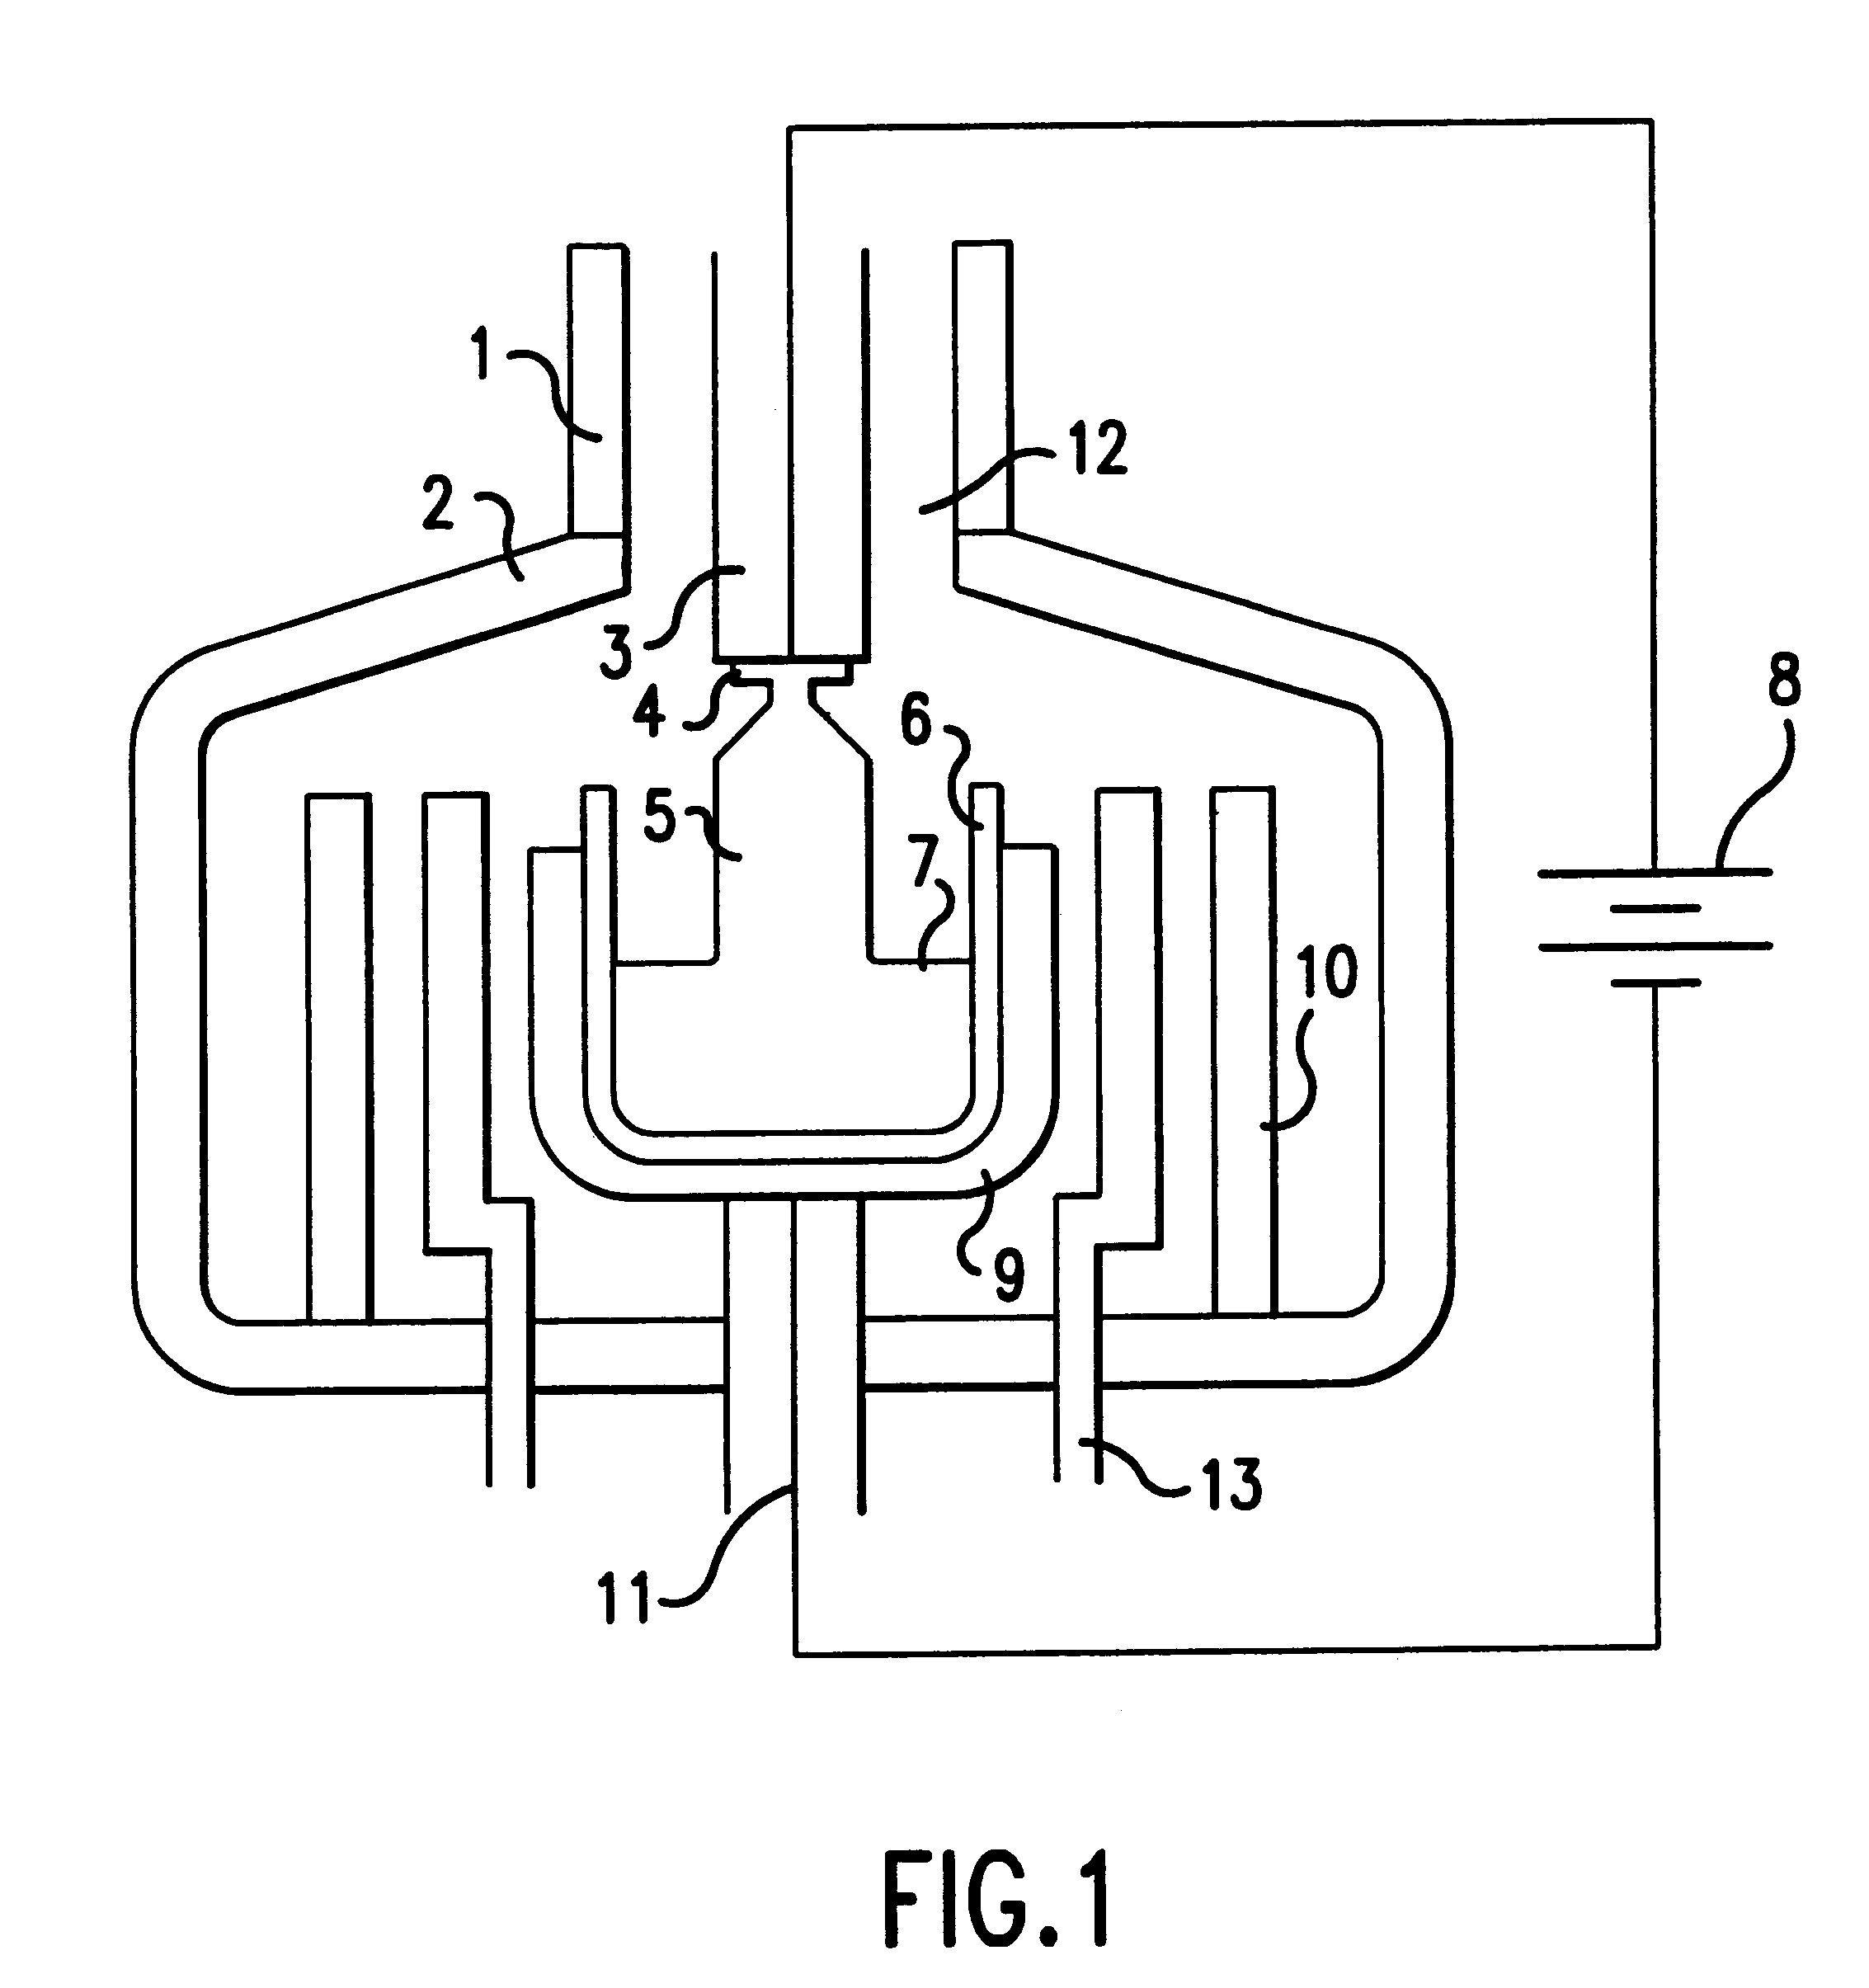 Method of manufacturing crystal of silicon using an electric potential